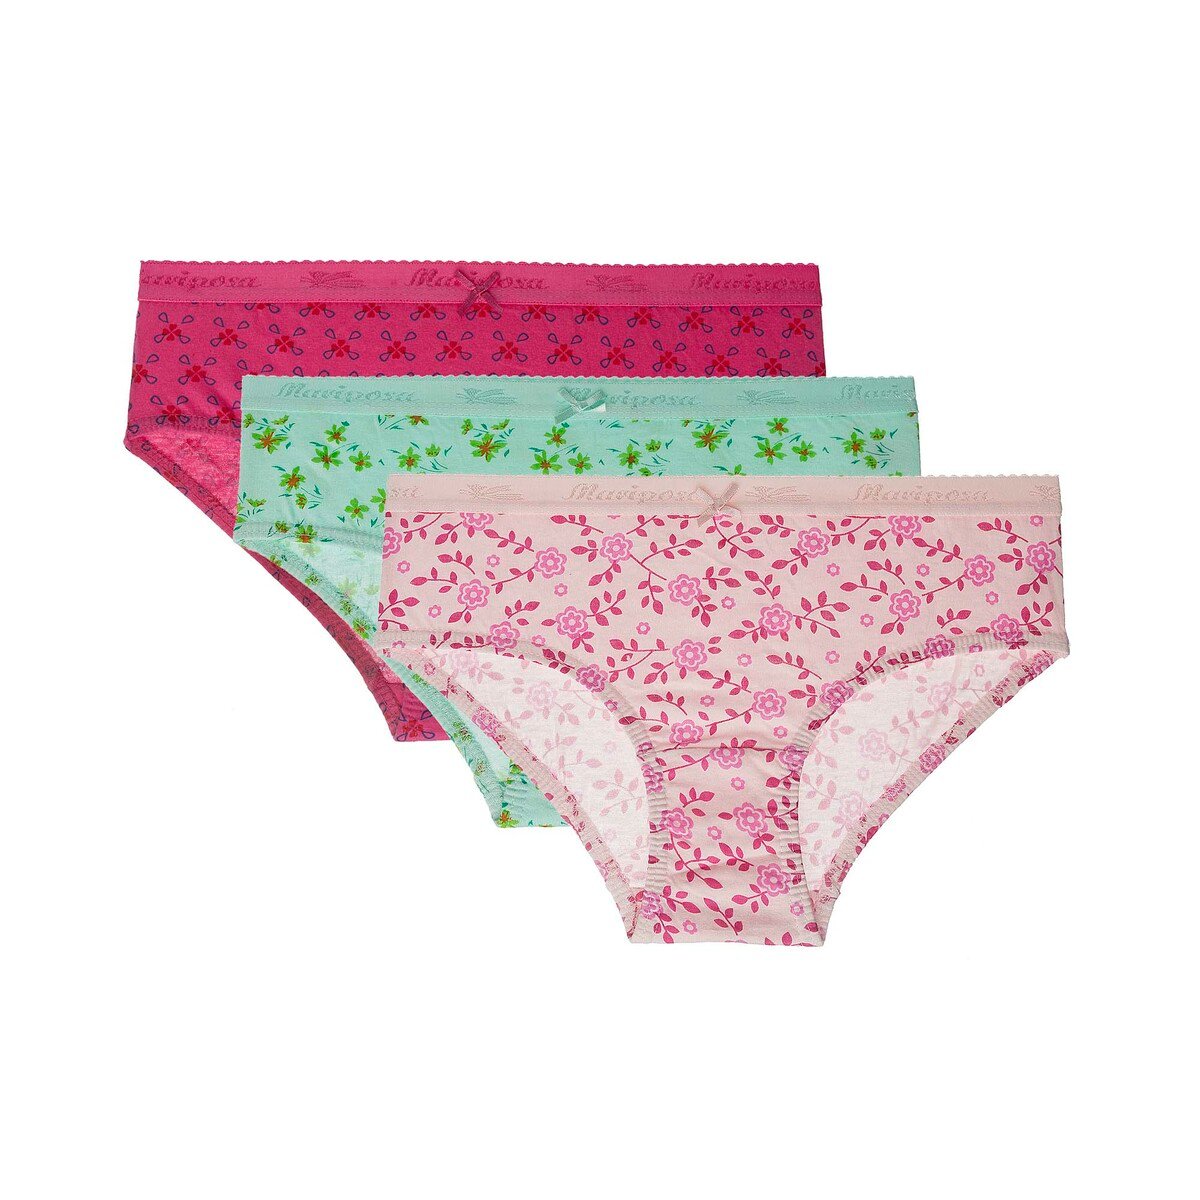 Mariposa Women's Panty Print Outer-36 3Pcs Pack Assorted Colors - Small ...